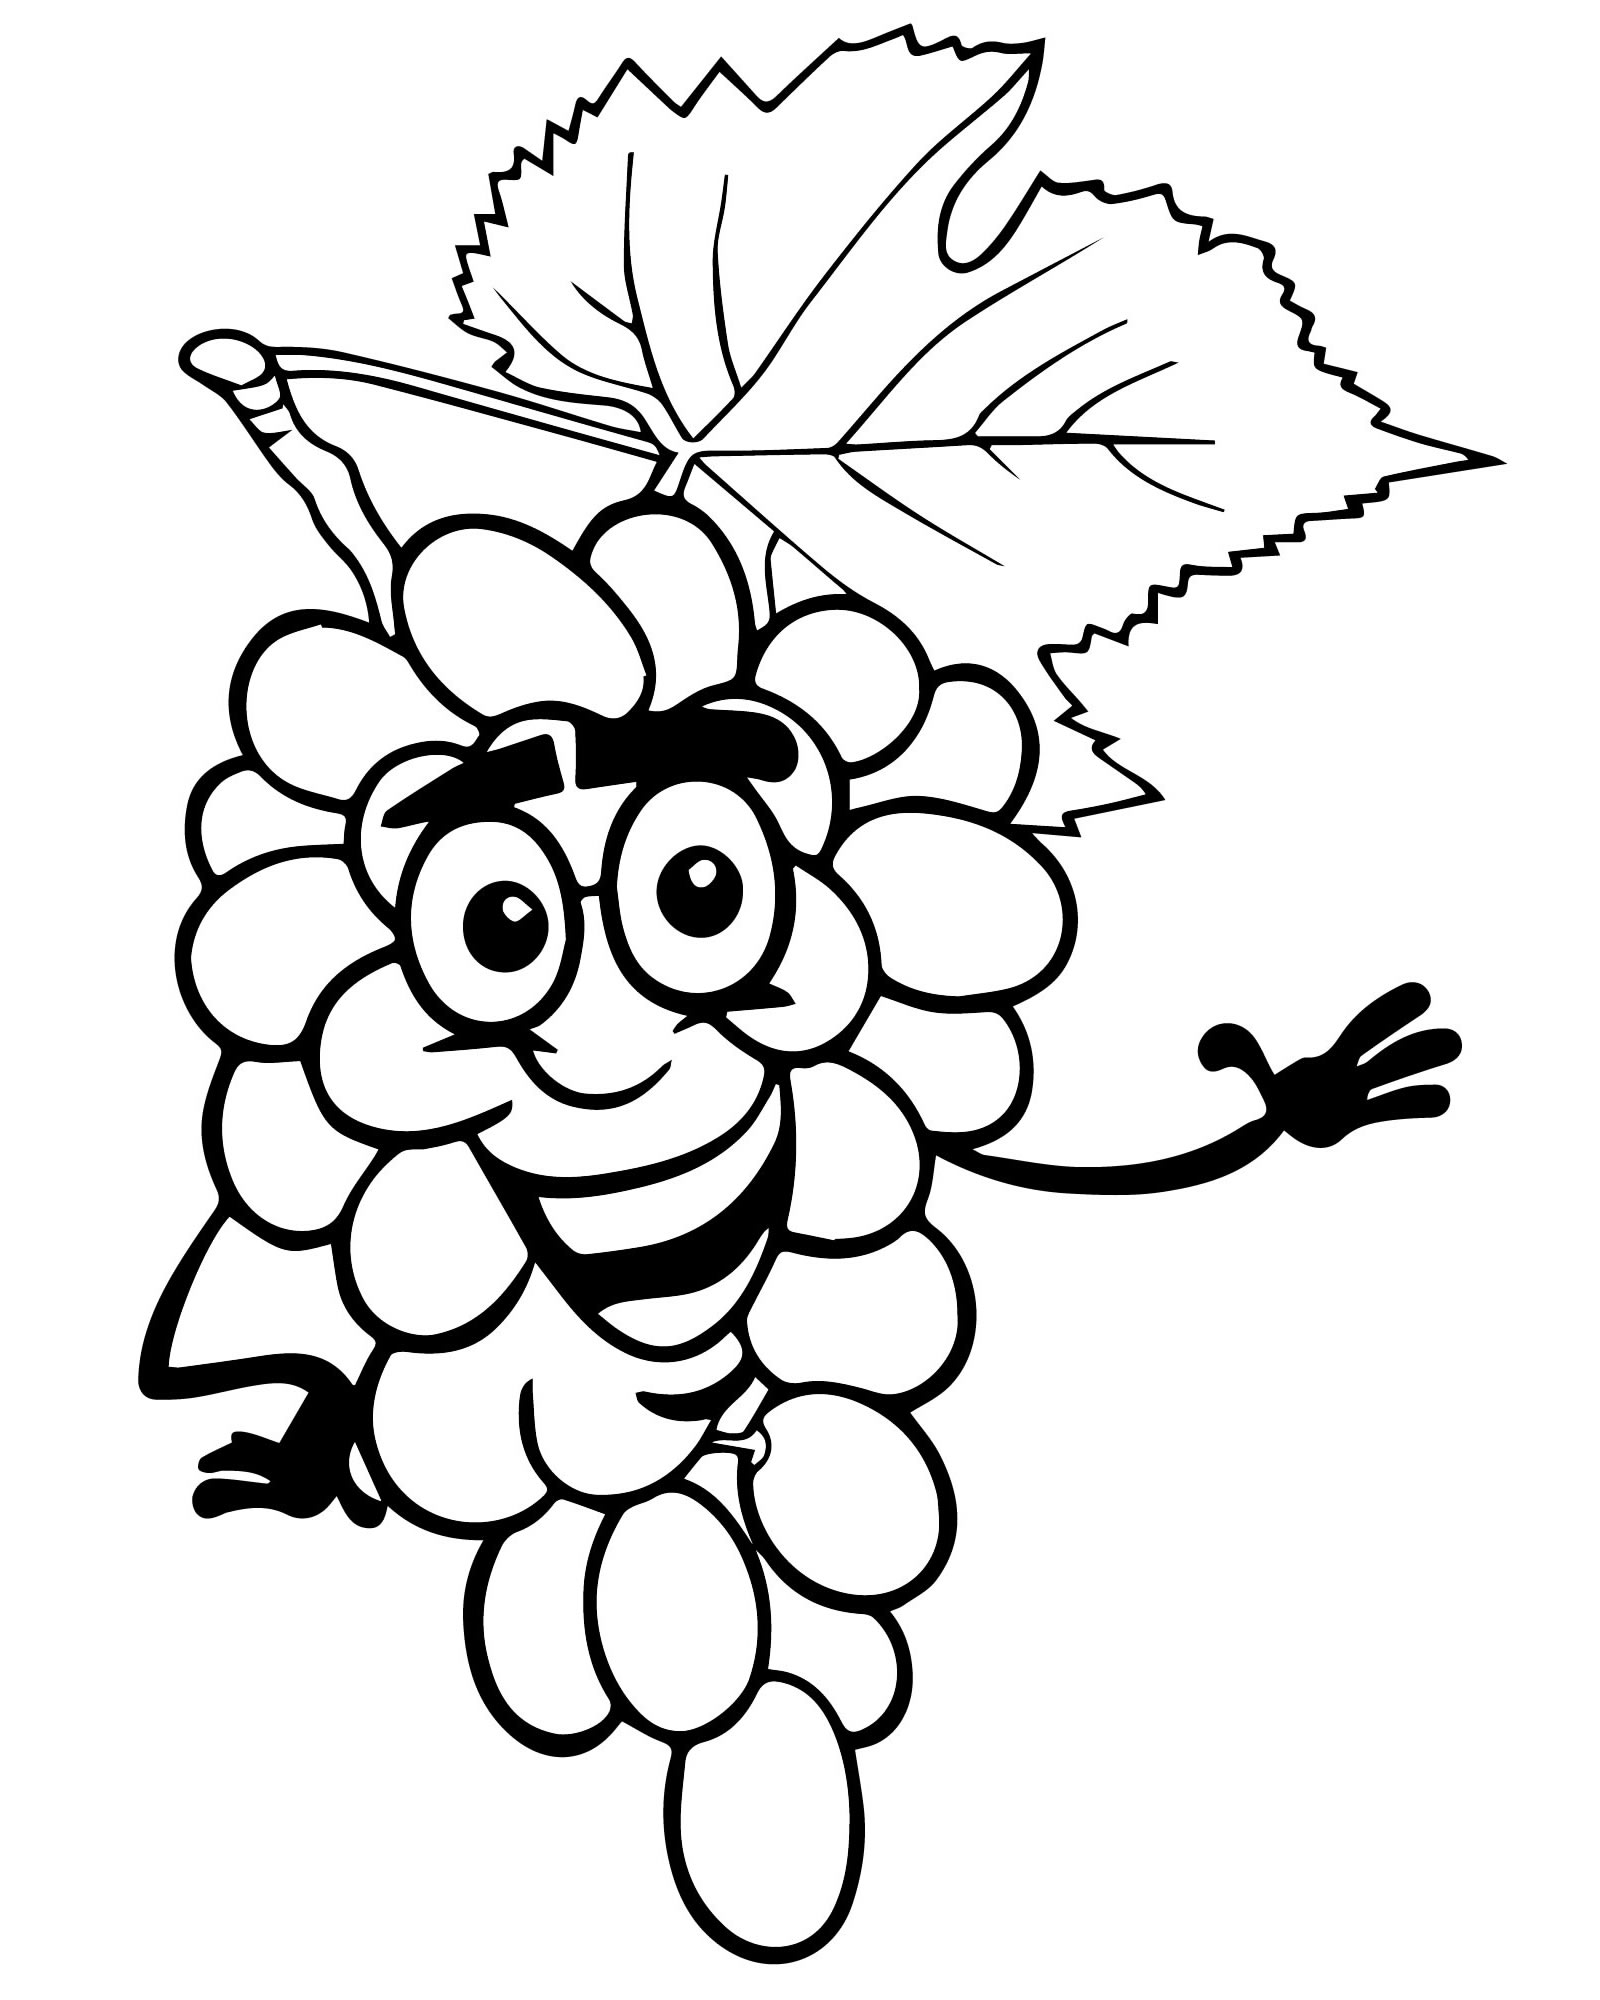 Adorable grape coloring page for kids